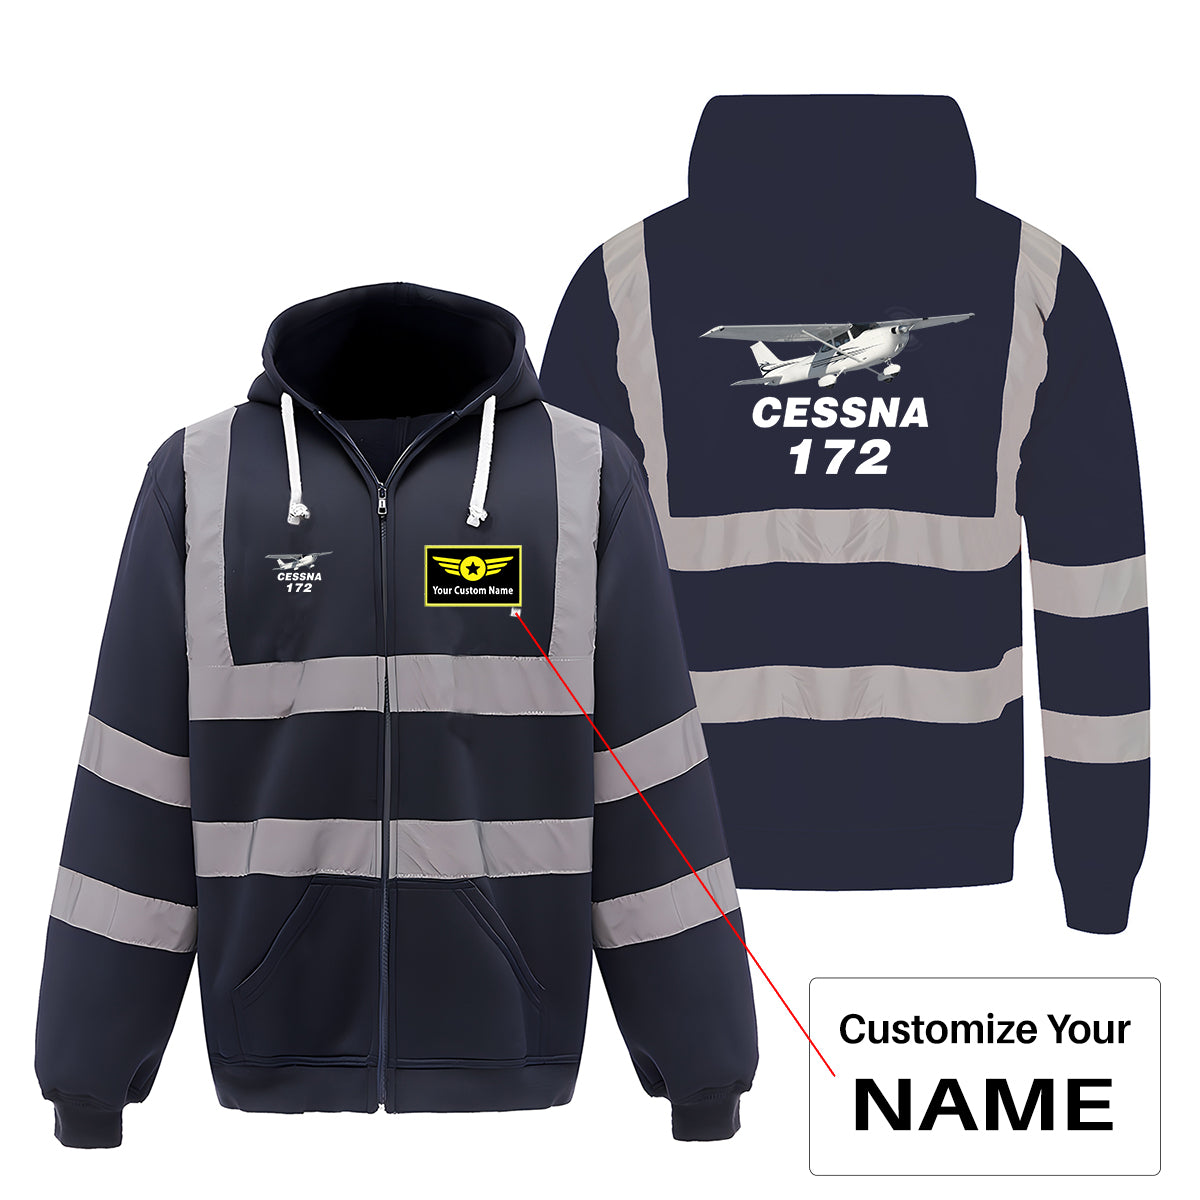 The Cessna 172 Designed Reflective Zipped Hoodies